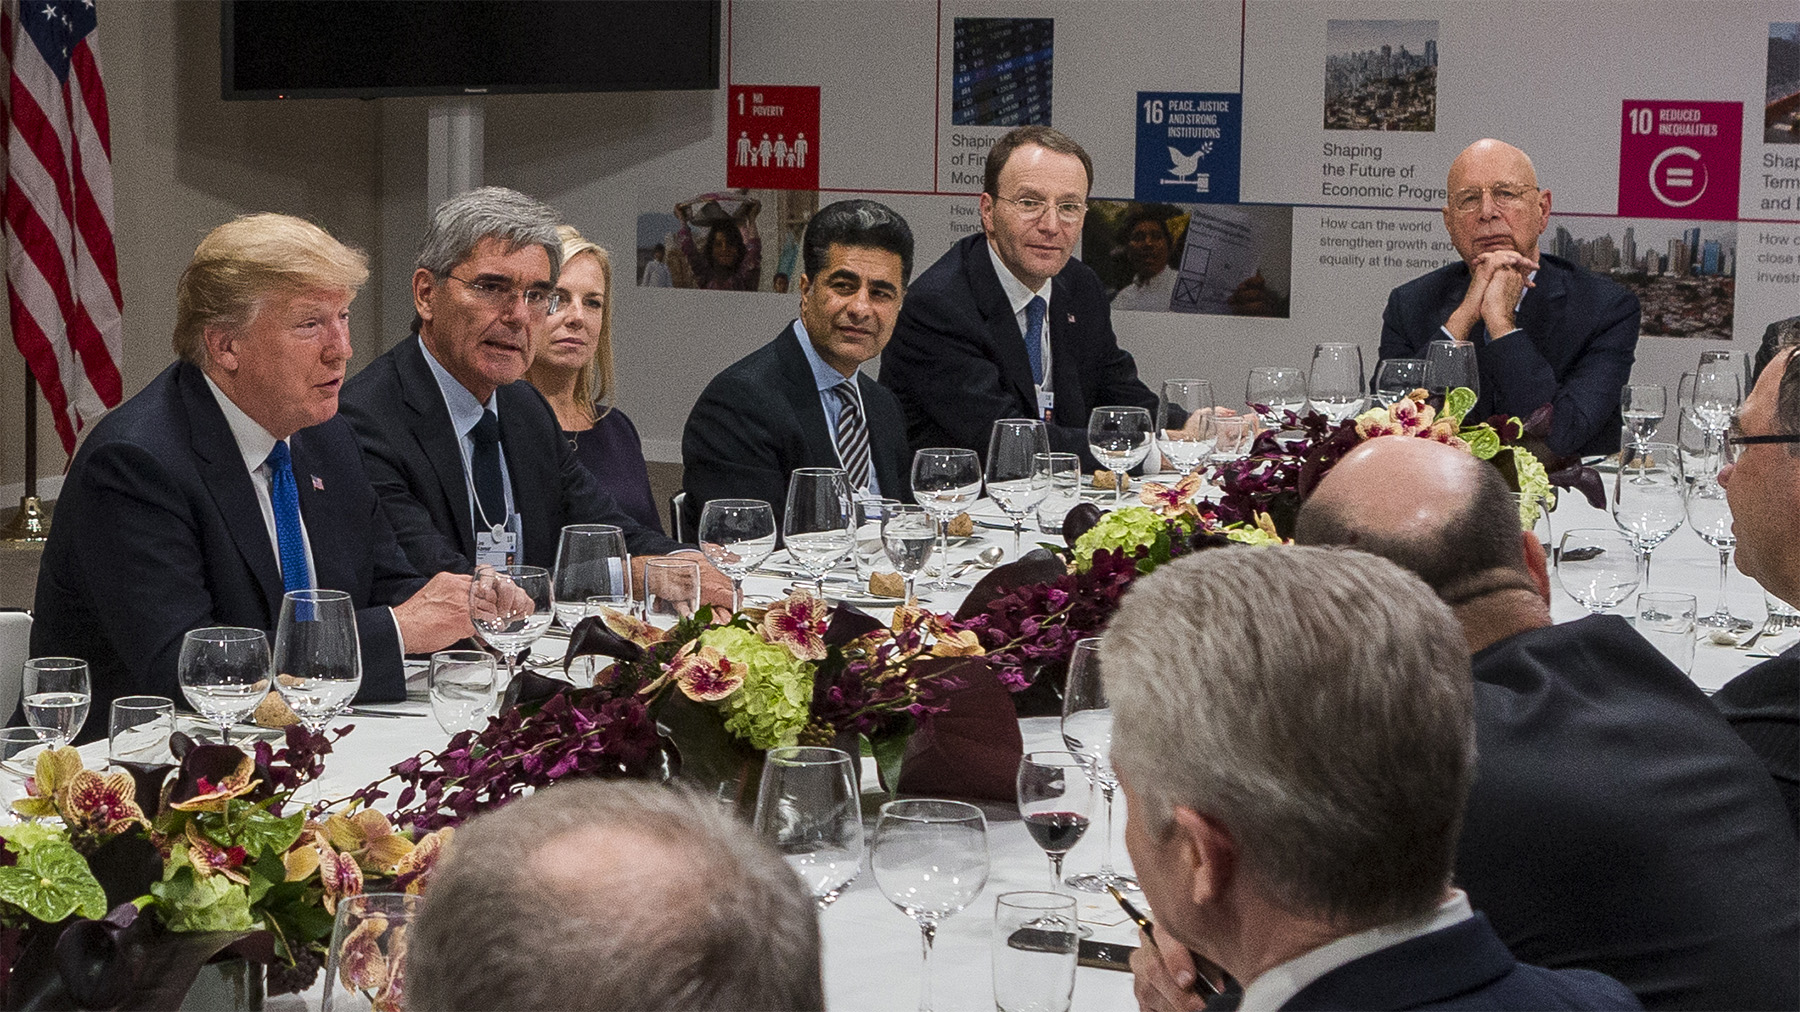 Private Business Leaders’ Dinner hosted by President Trump at the Annual Meeting 2018 of the World Economic Forum in Davos, January 25, 2018.